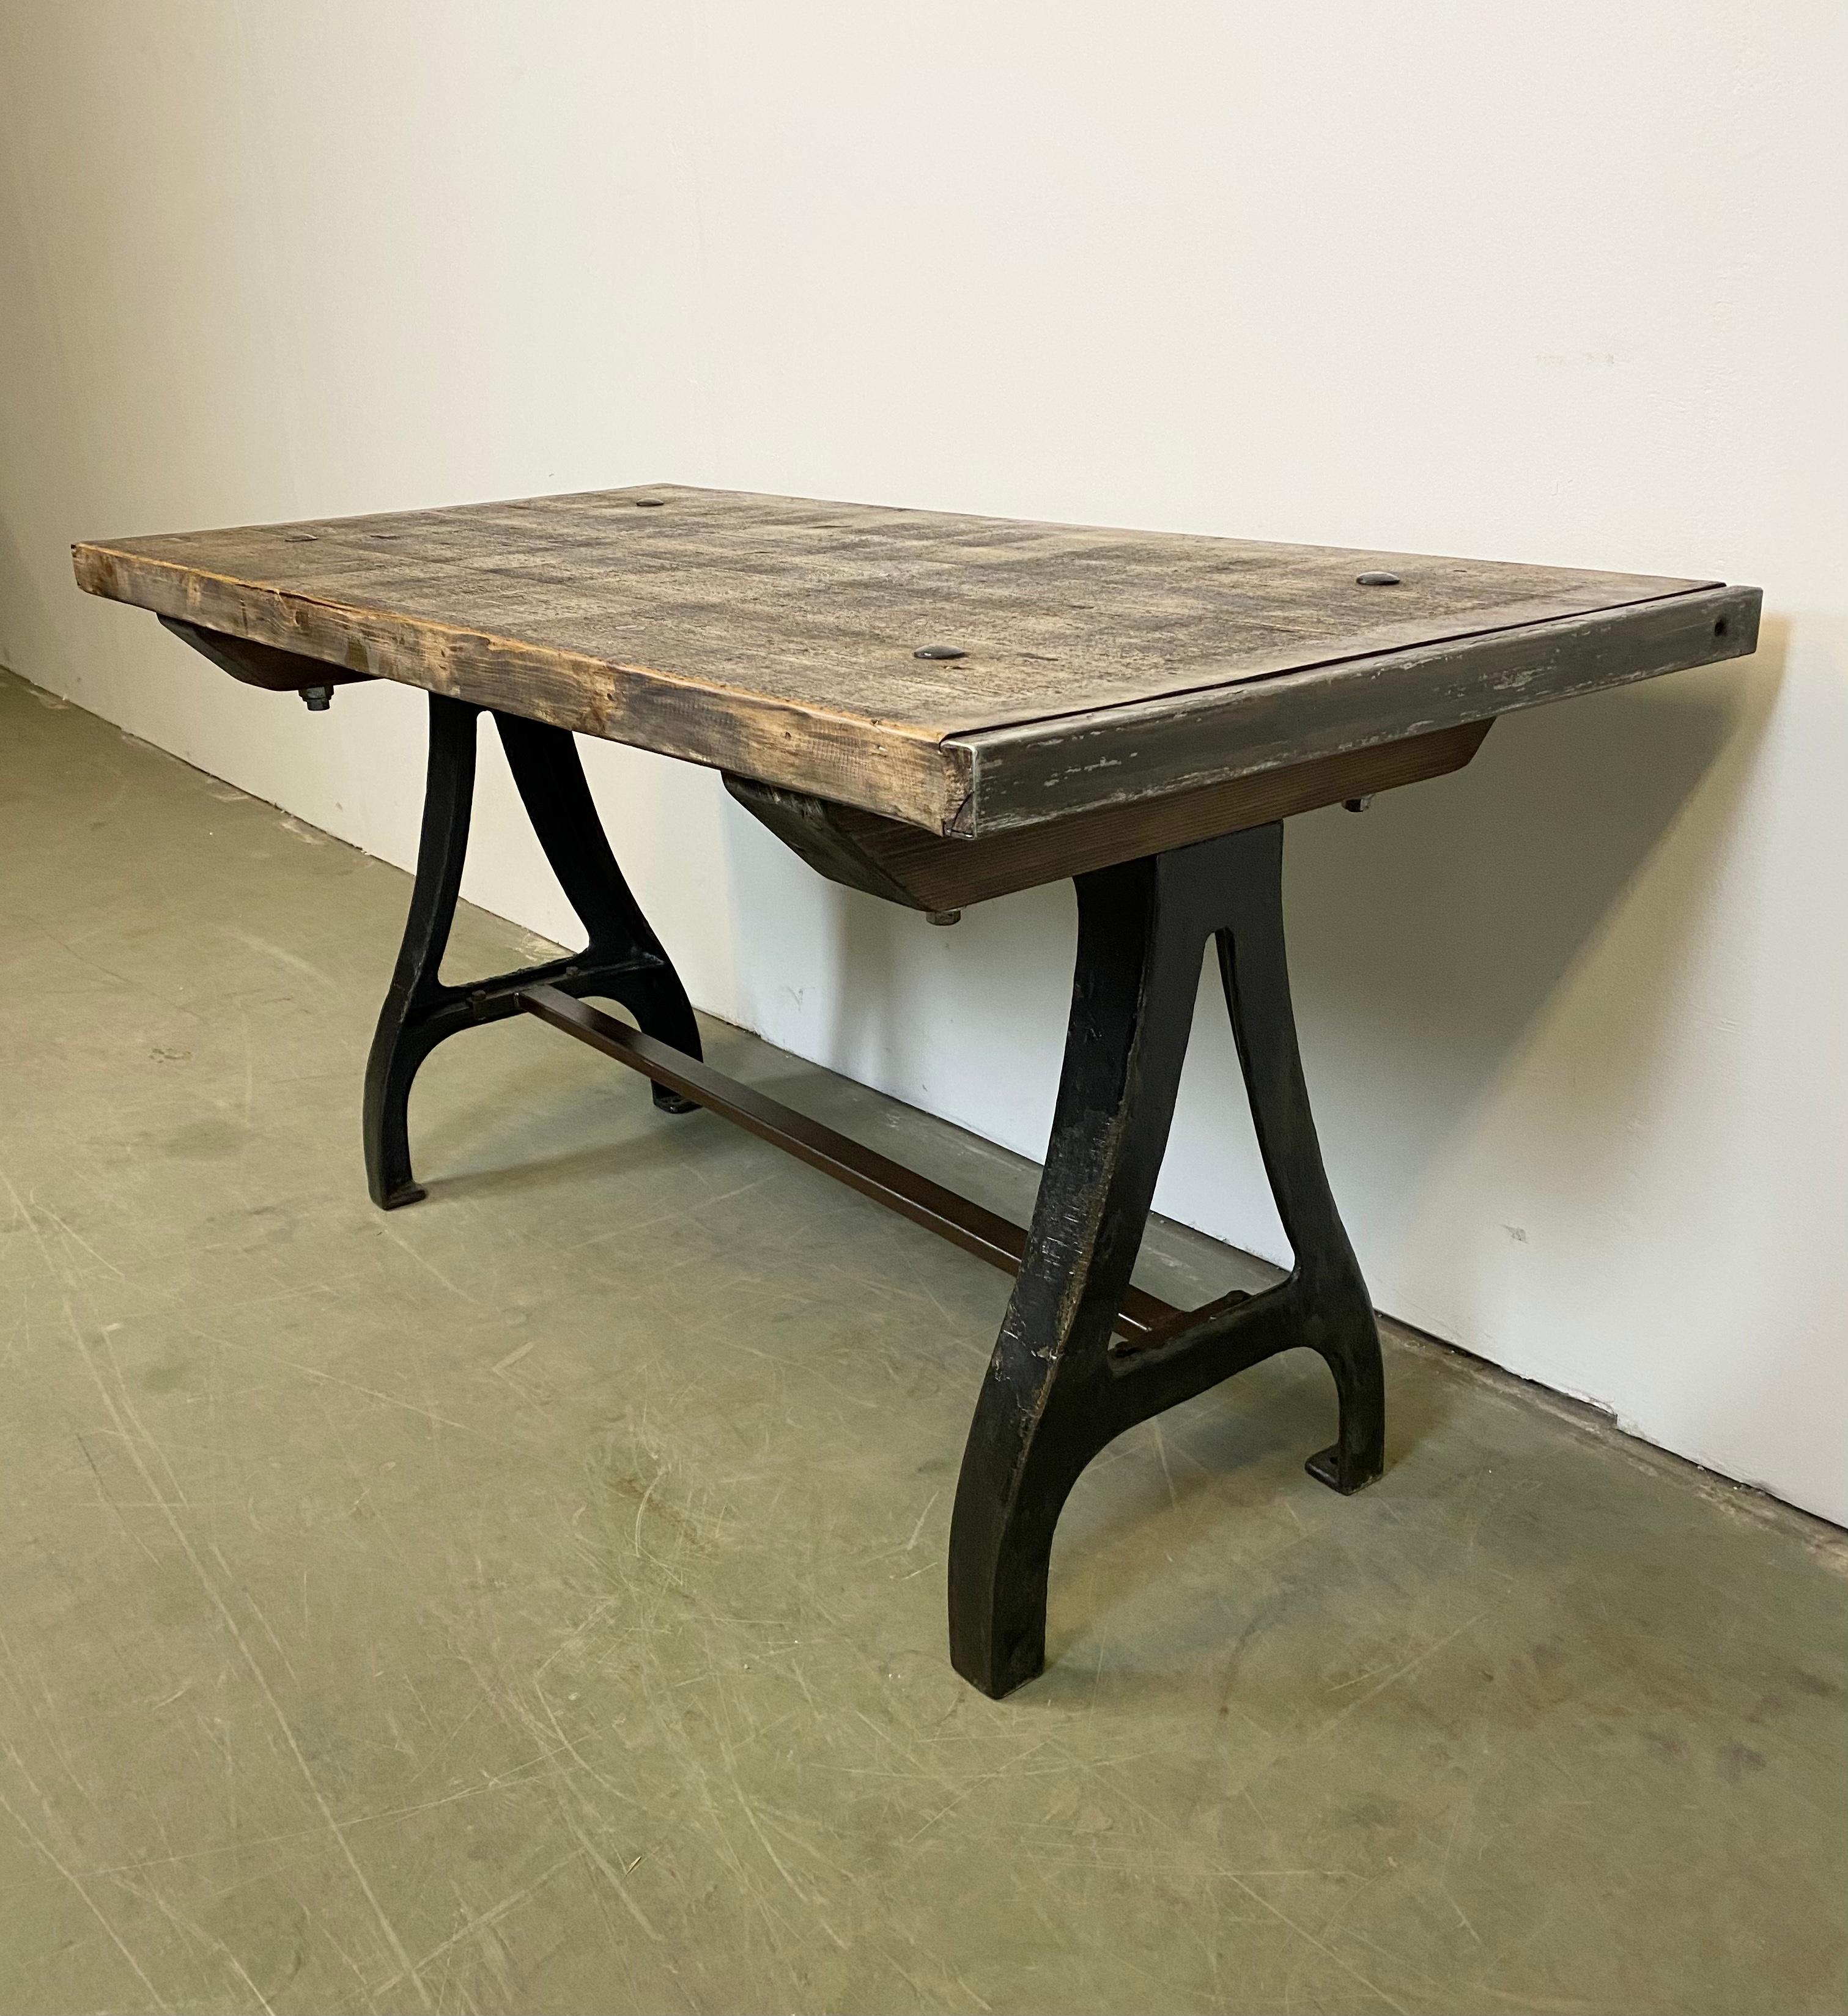 European Vintage Industrial Dining Table with Cast Iron Legs